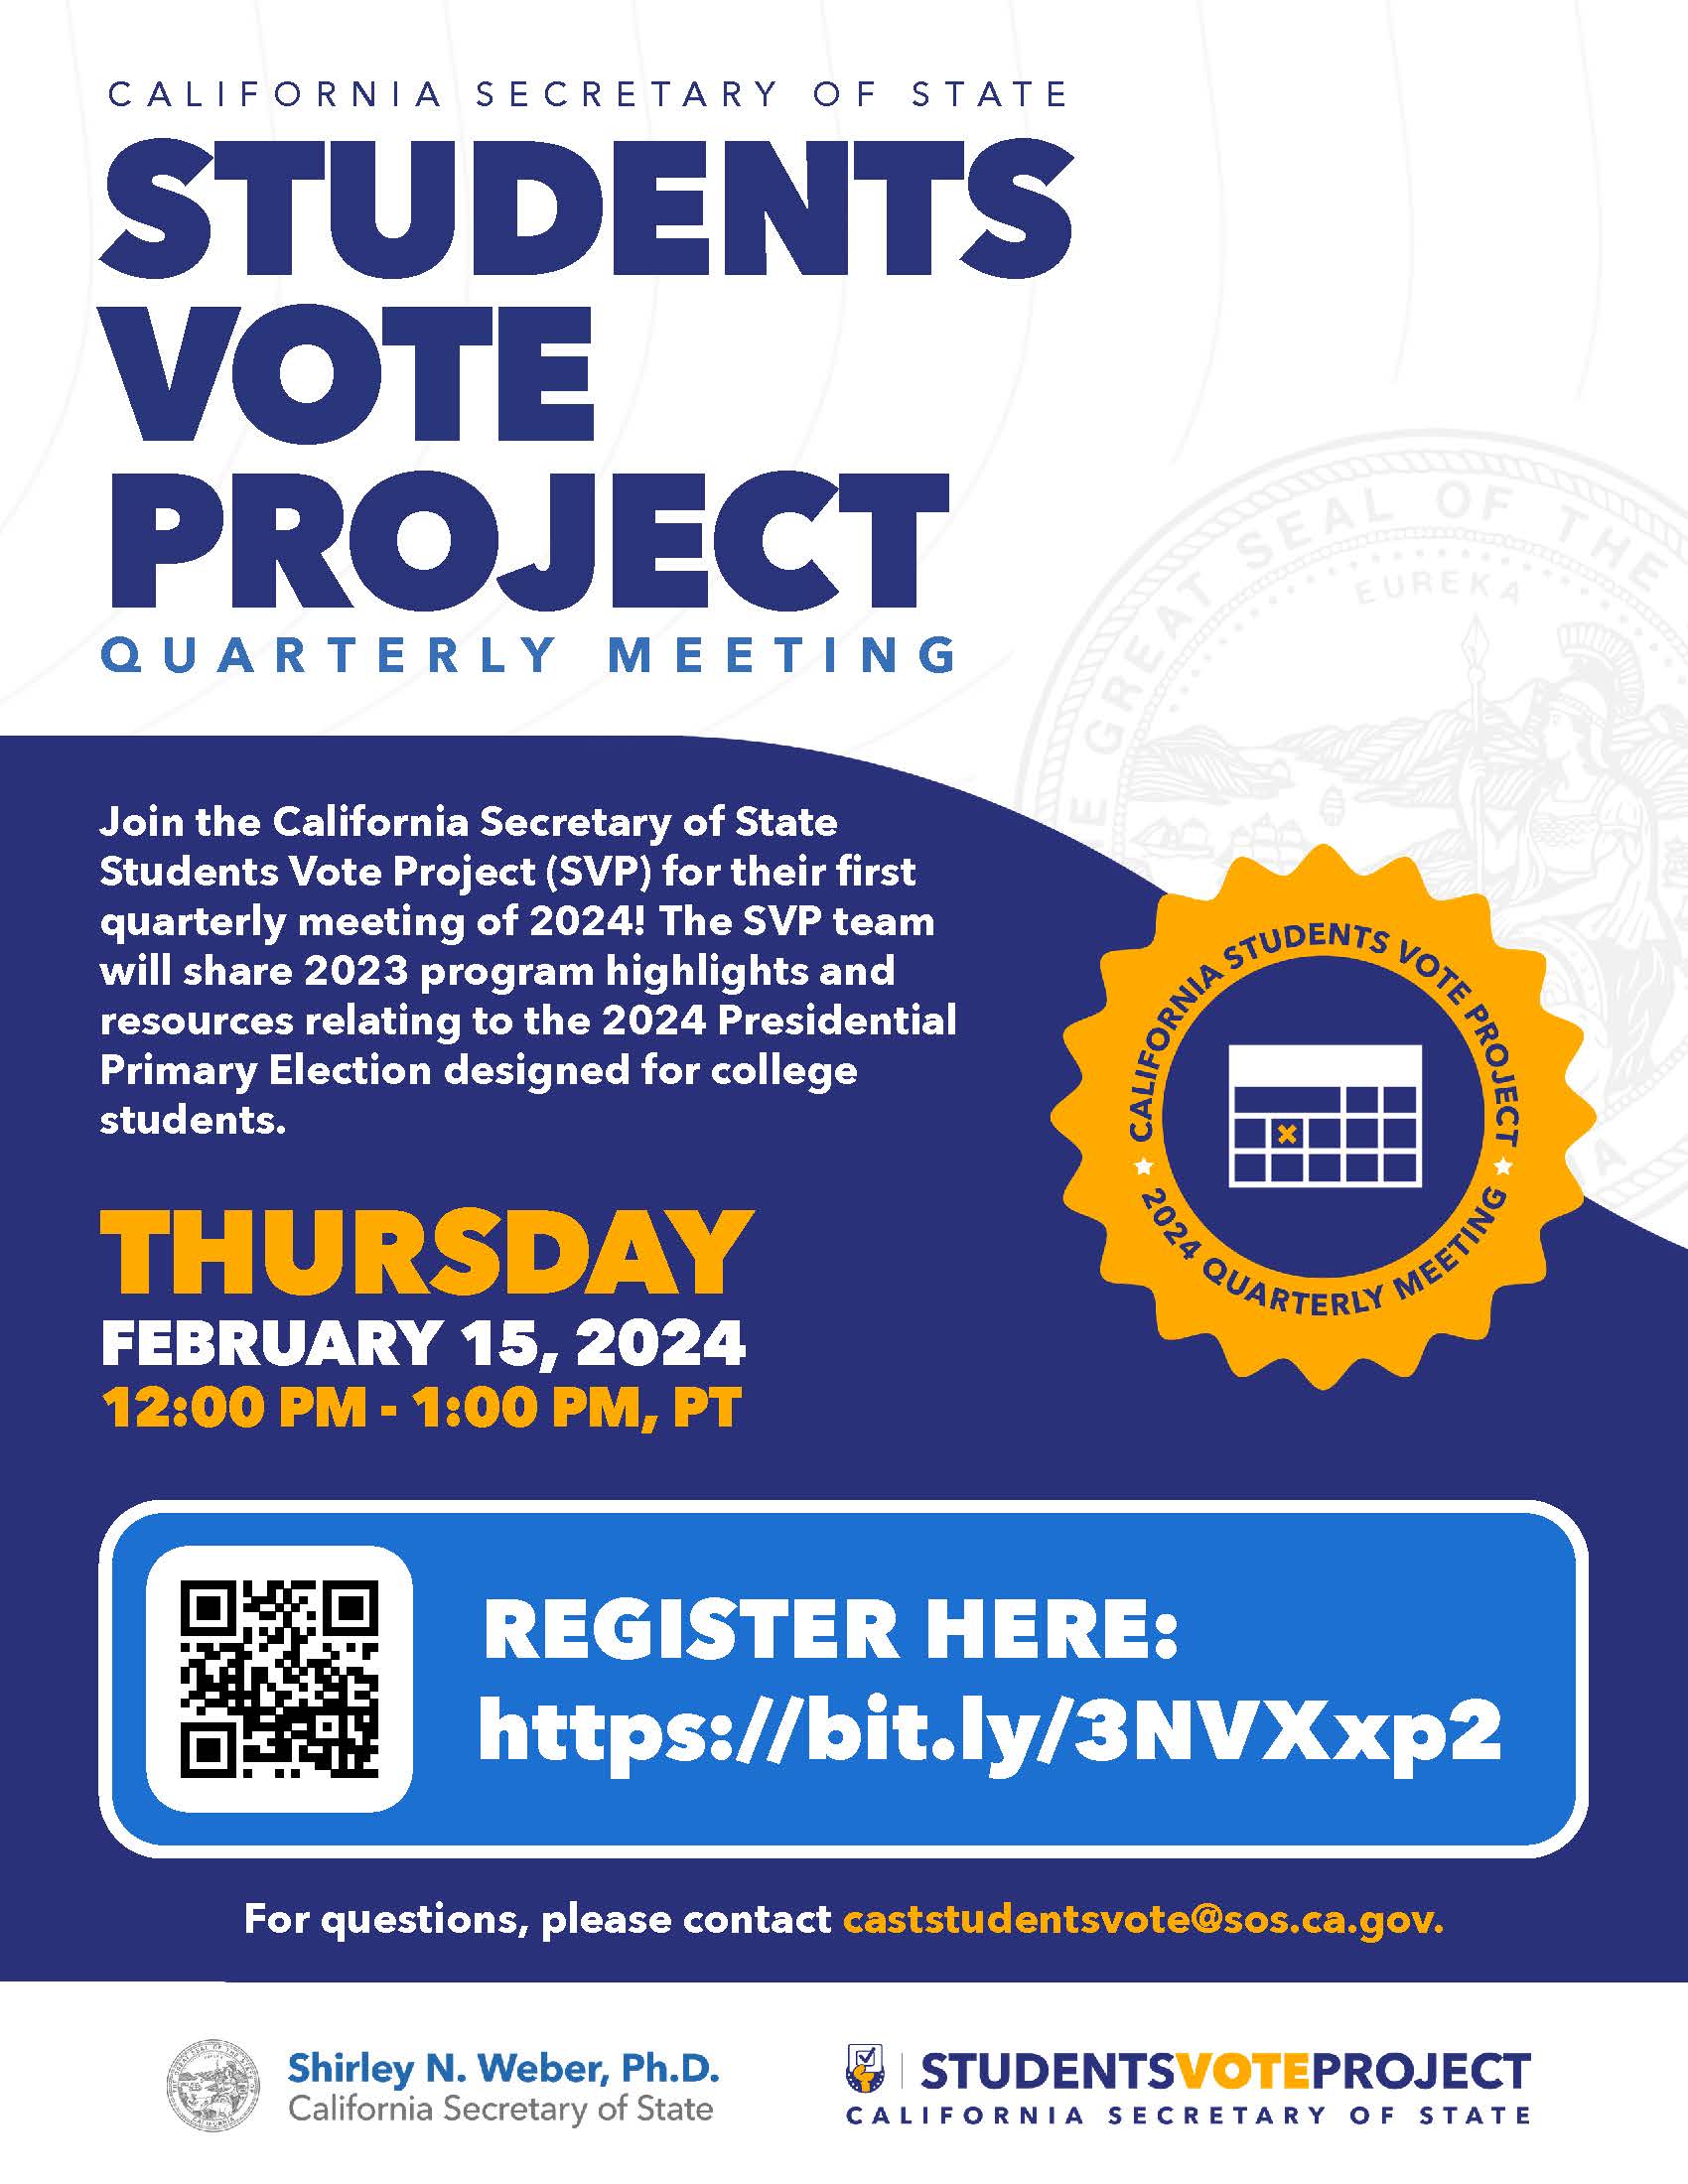 Student Vote Project Quarterly Meeting